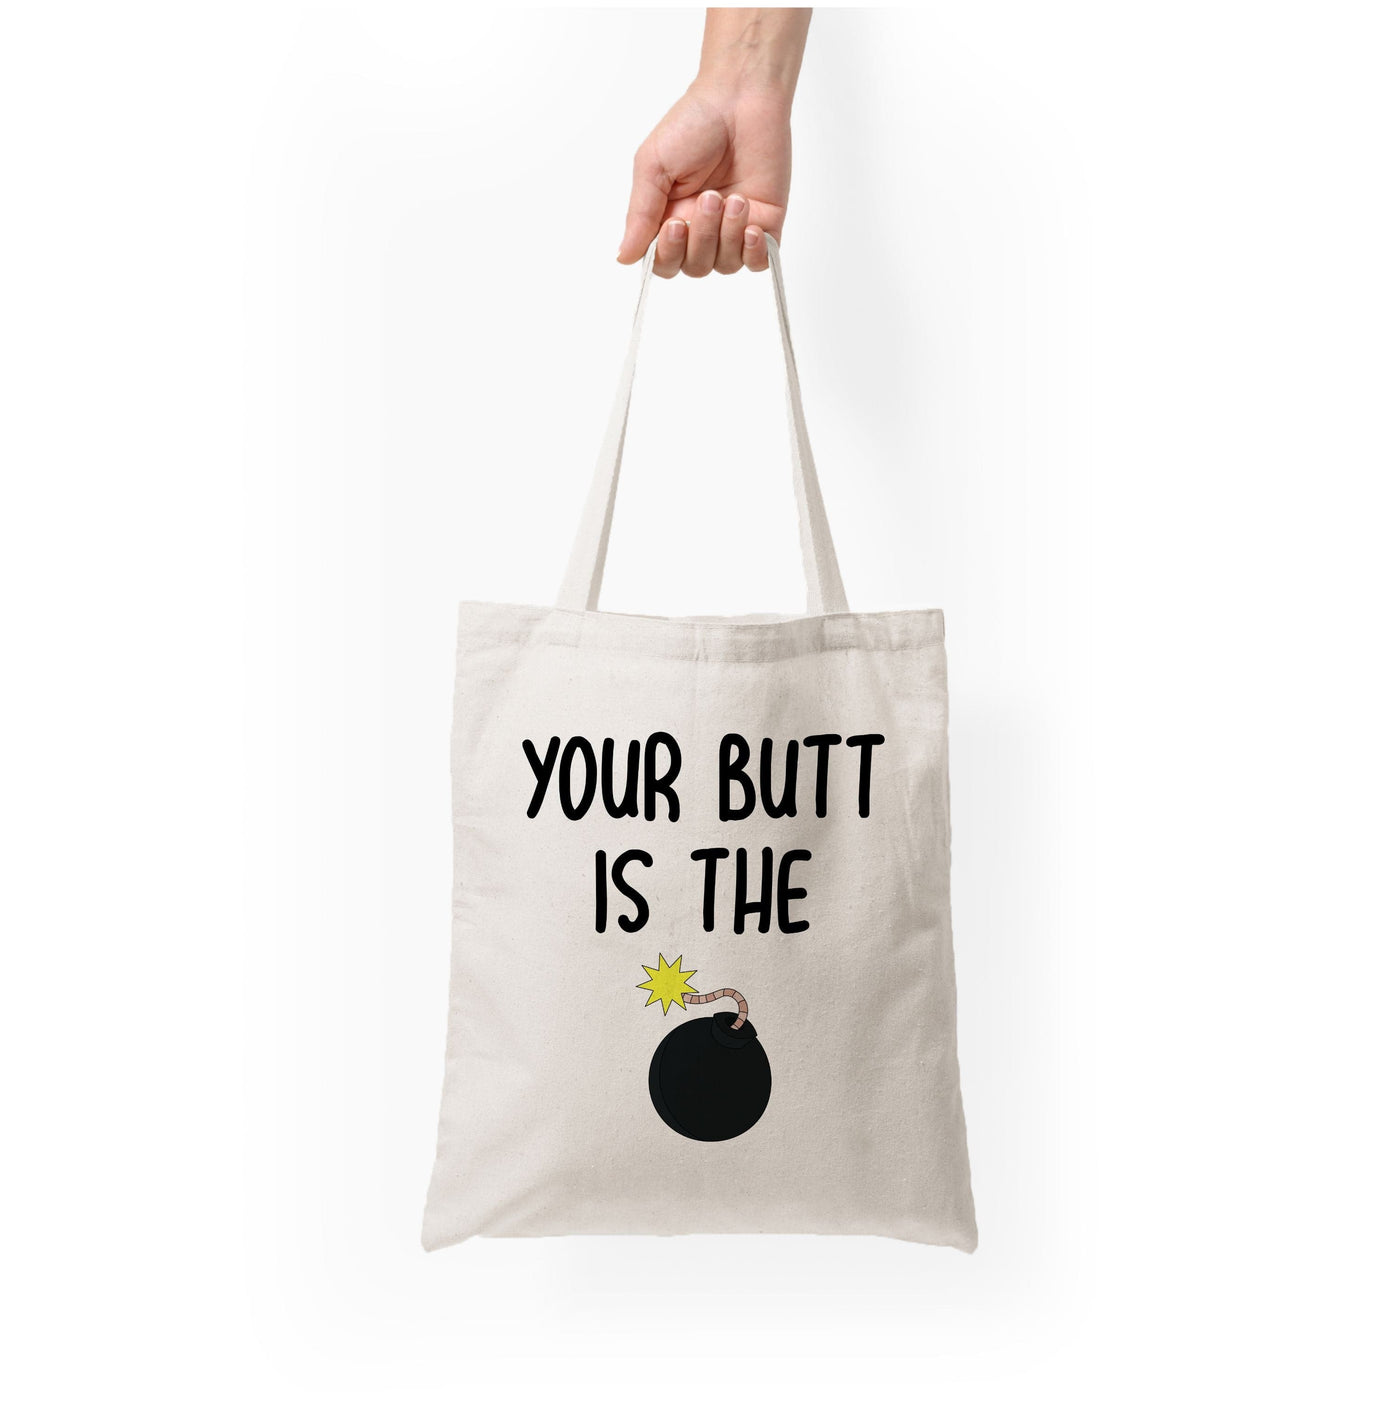 Your Butt Is The Bomb - Brooklyn Nine-Nine Tote Bag